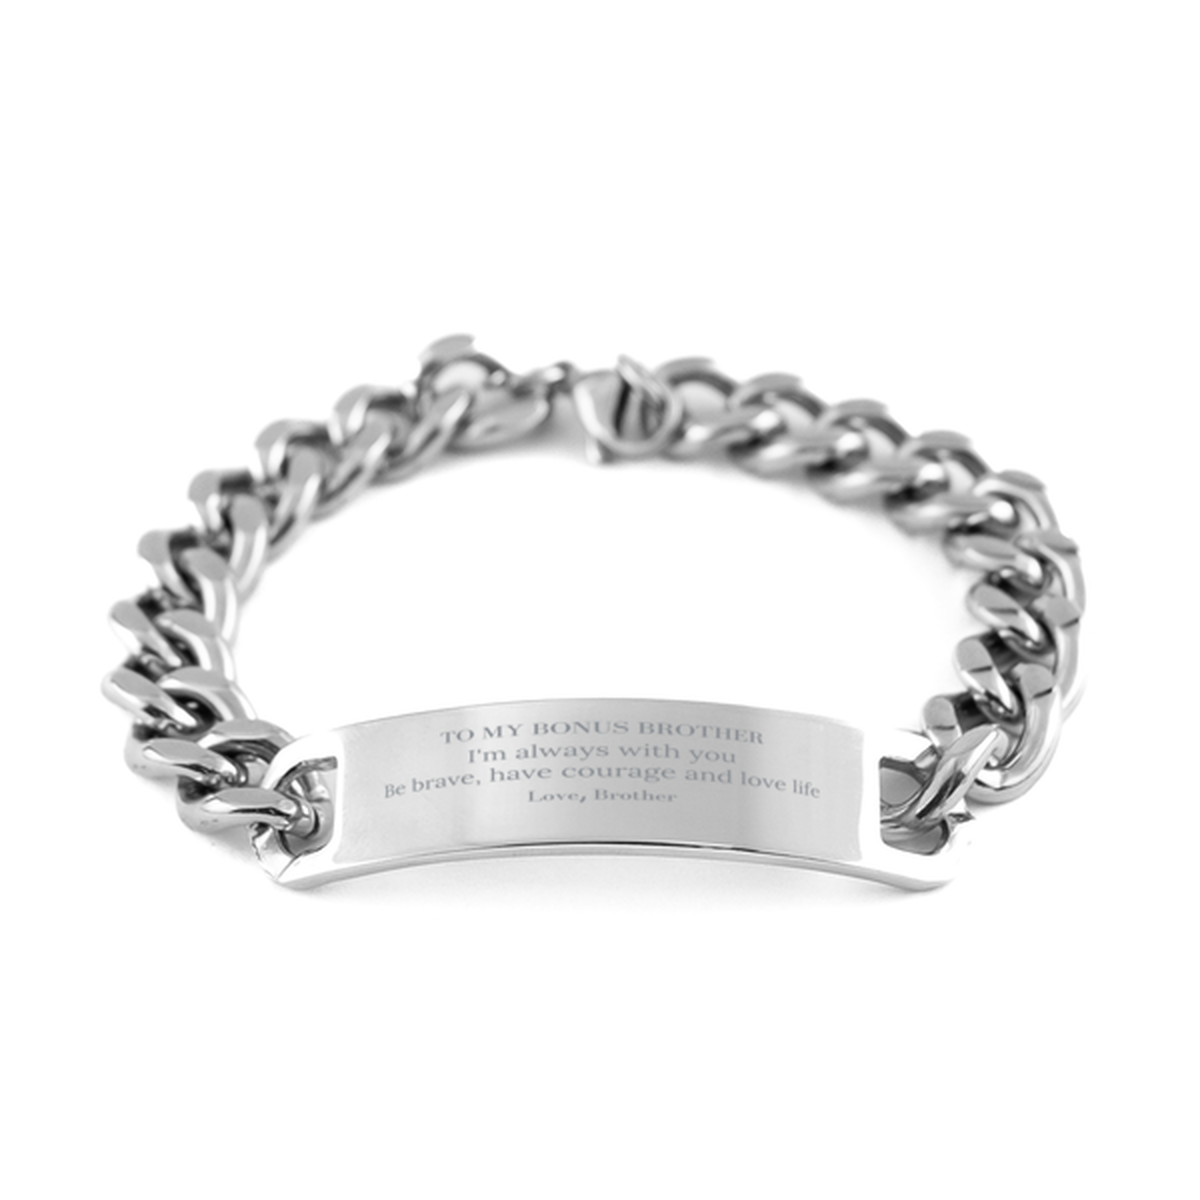 To My Bonus Brother Gifts from Brother, Unique Cuban Chain Stainless Steel Bracelet Inspirational Christmas Birthday Graduation Gifts for Bonus Brother I'm always with you. Be brave, have courage and love life. Love, Brother